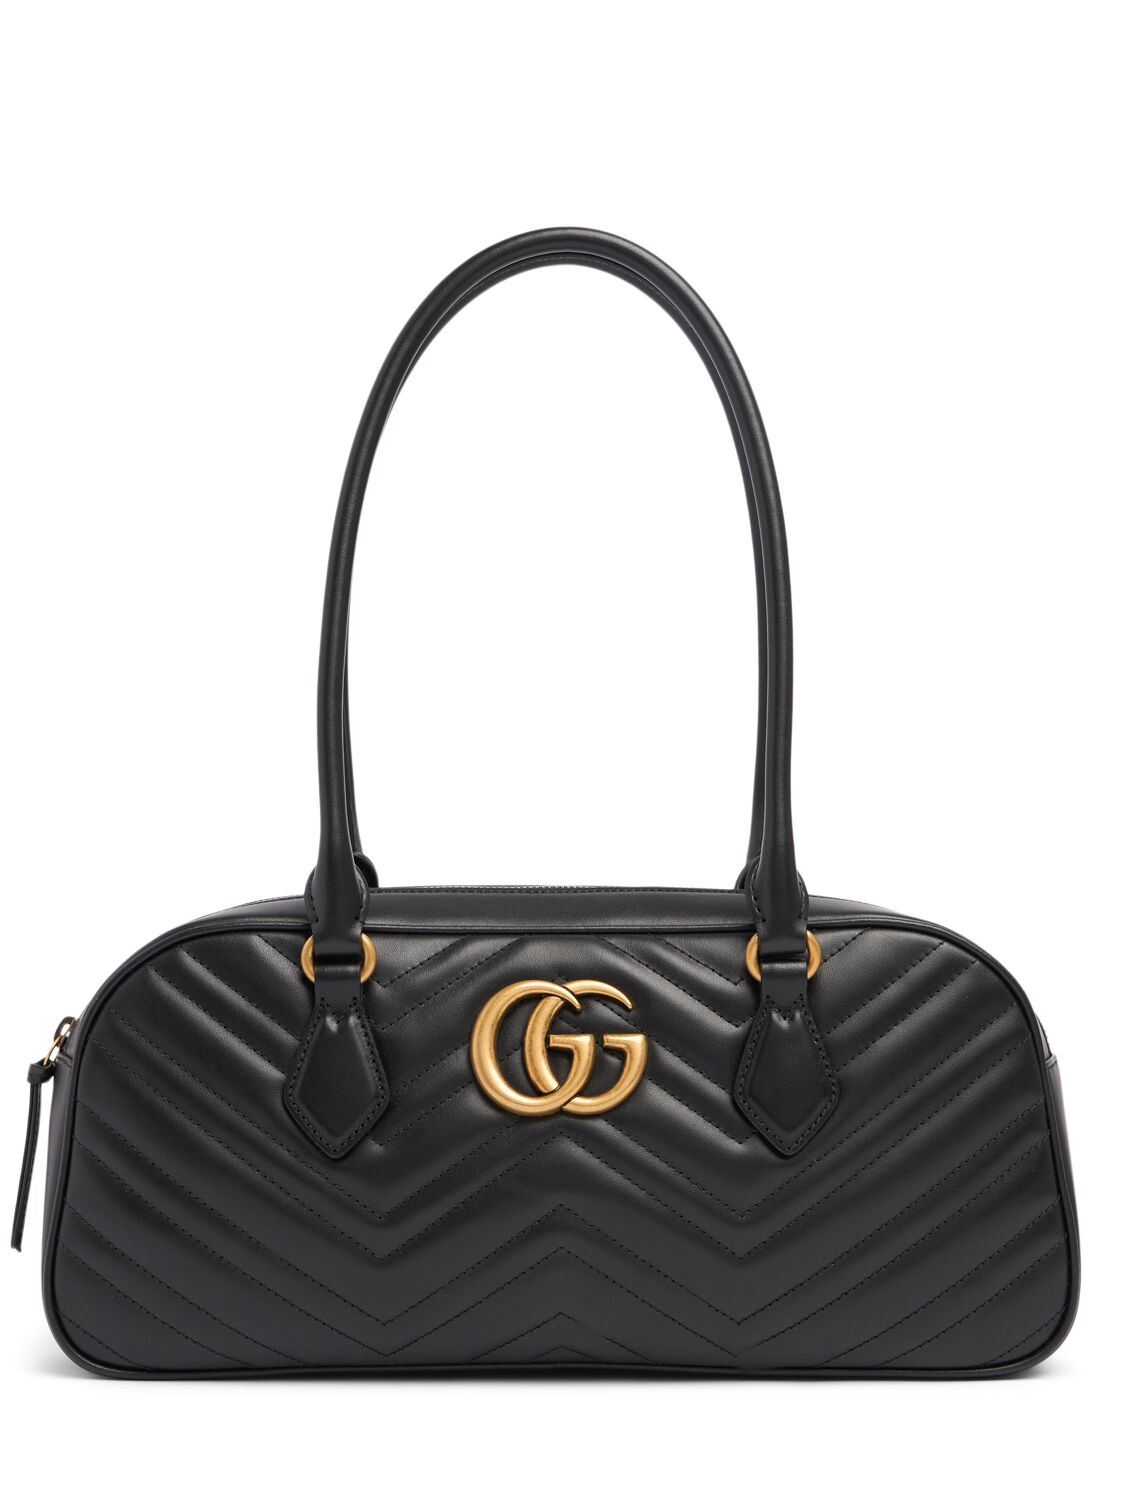 Gucci Gg Marmont Leather Top Handle Bag In Black